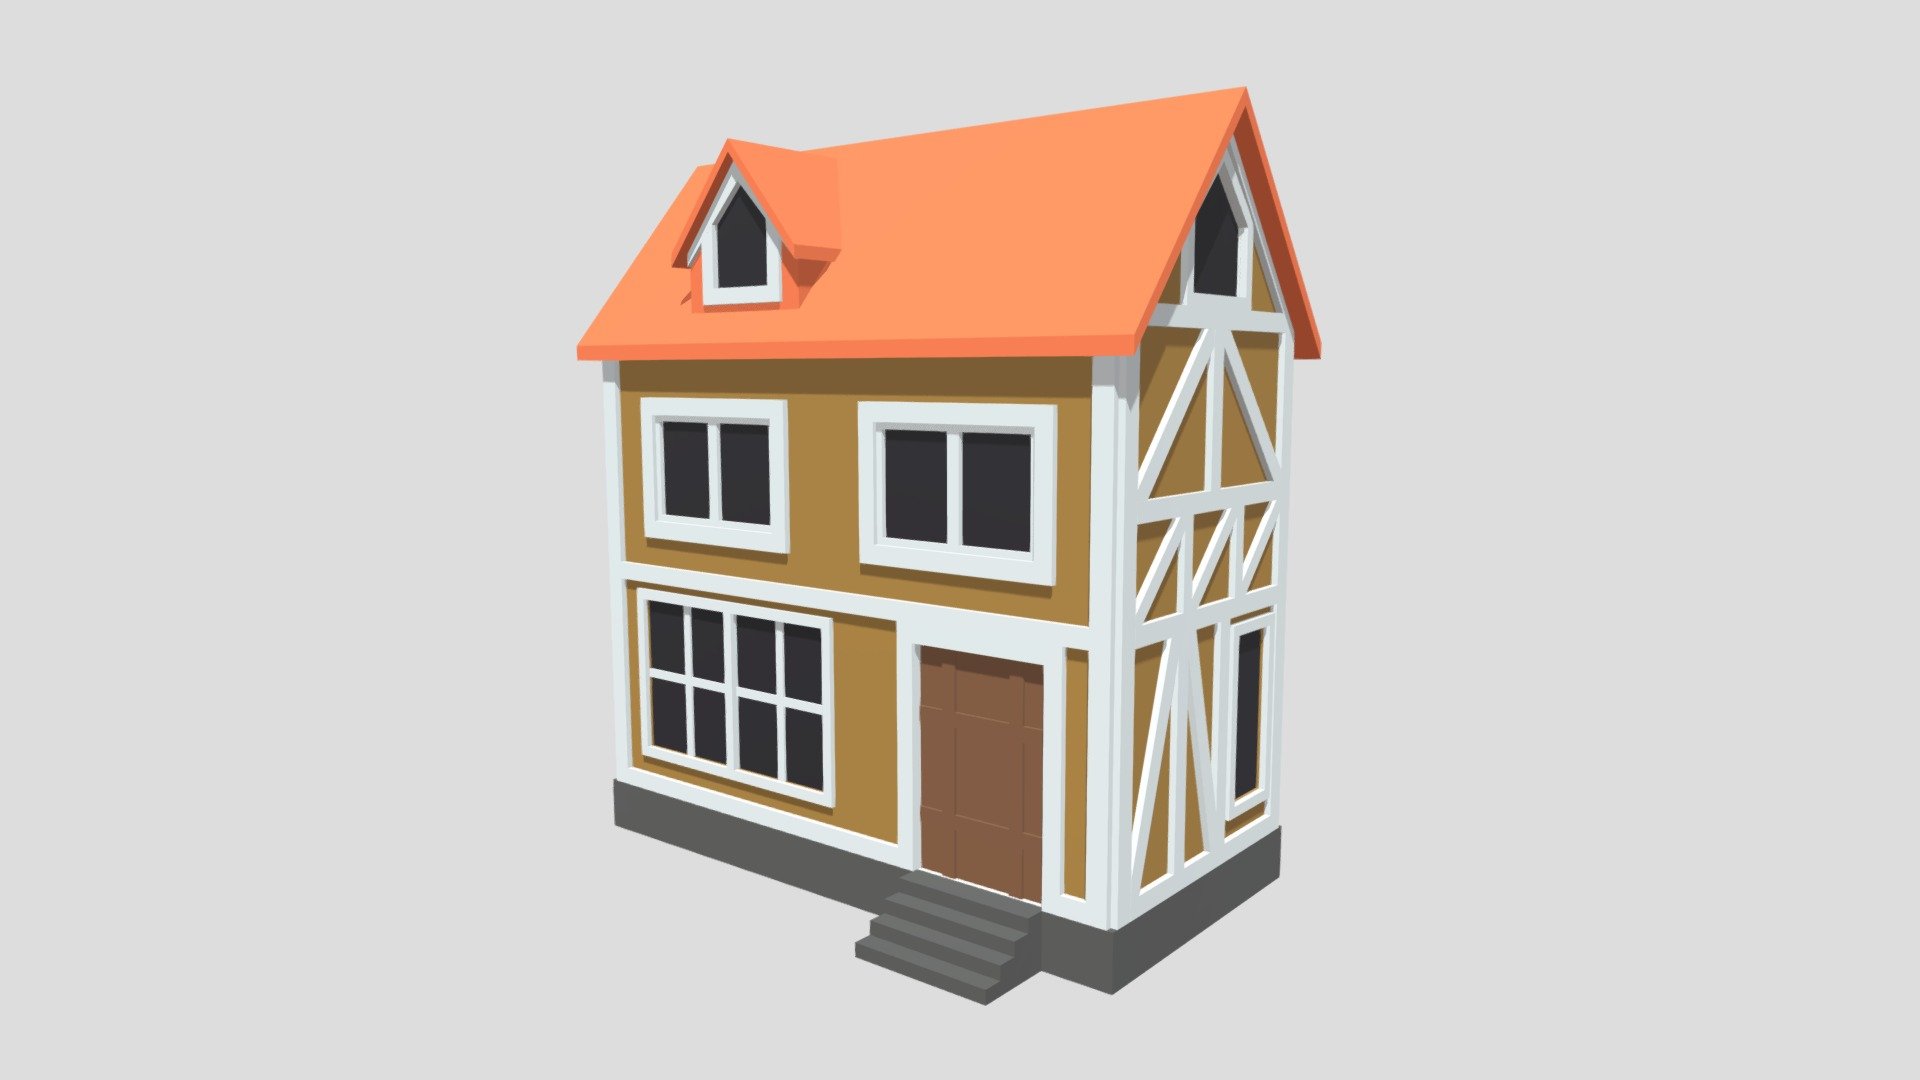 -Cartoon Medieval House.

-This product contains 1 object.

-Vert: 1,622 poly: 1,228.

-Objects and materials have the correct names.

-Real World Scale.

-This product was created in Blender 2.8.

-Formats: blend, fbx, obj, c4d, dae, abc, stl, u4d glb, unity.

-We hope you enjoy this model.

-Thank you 3d model